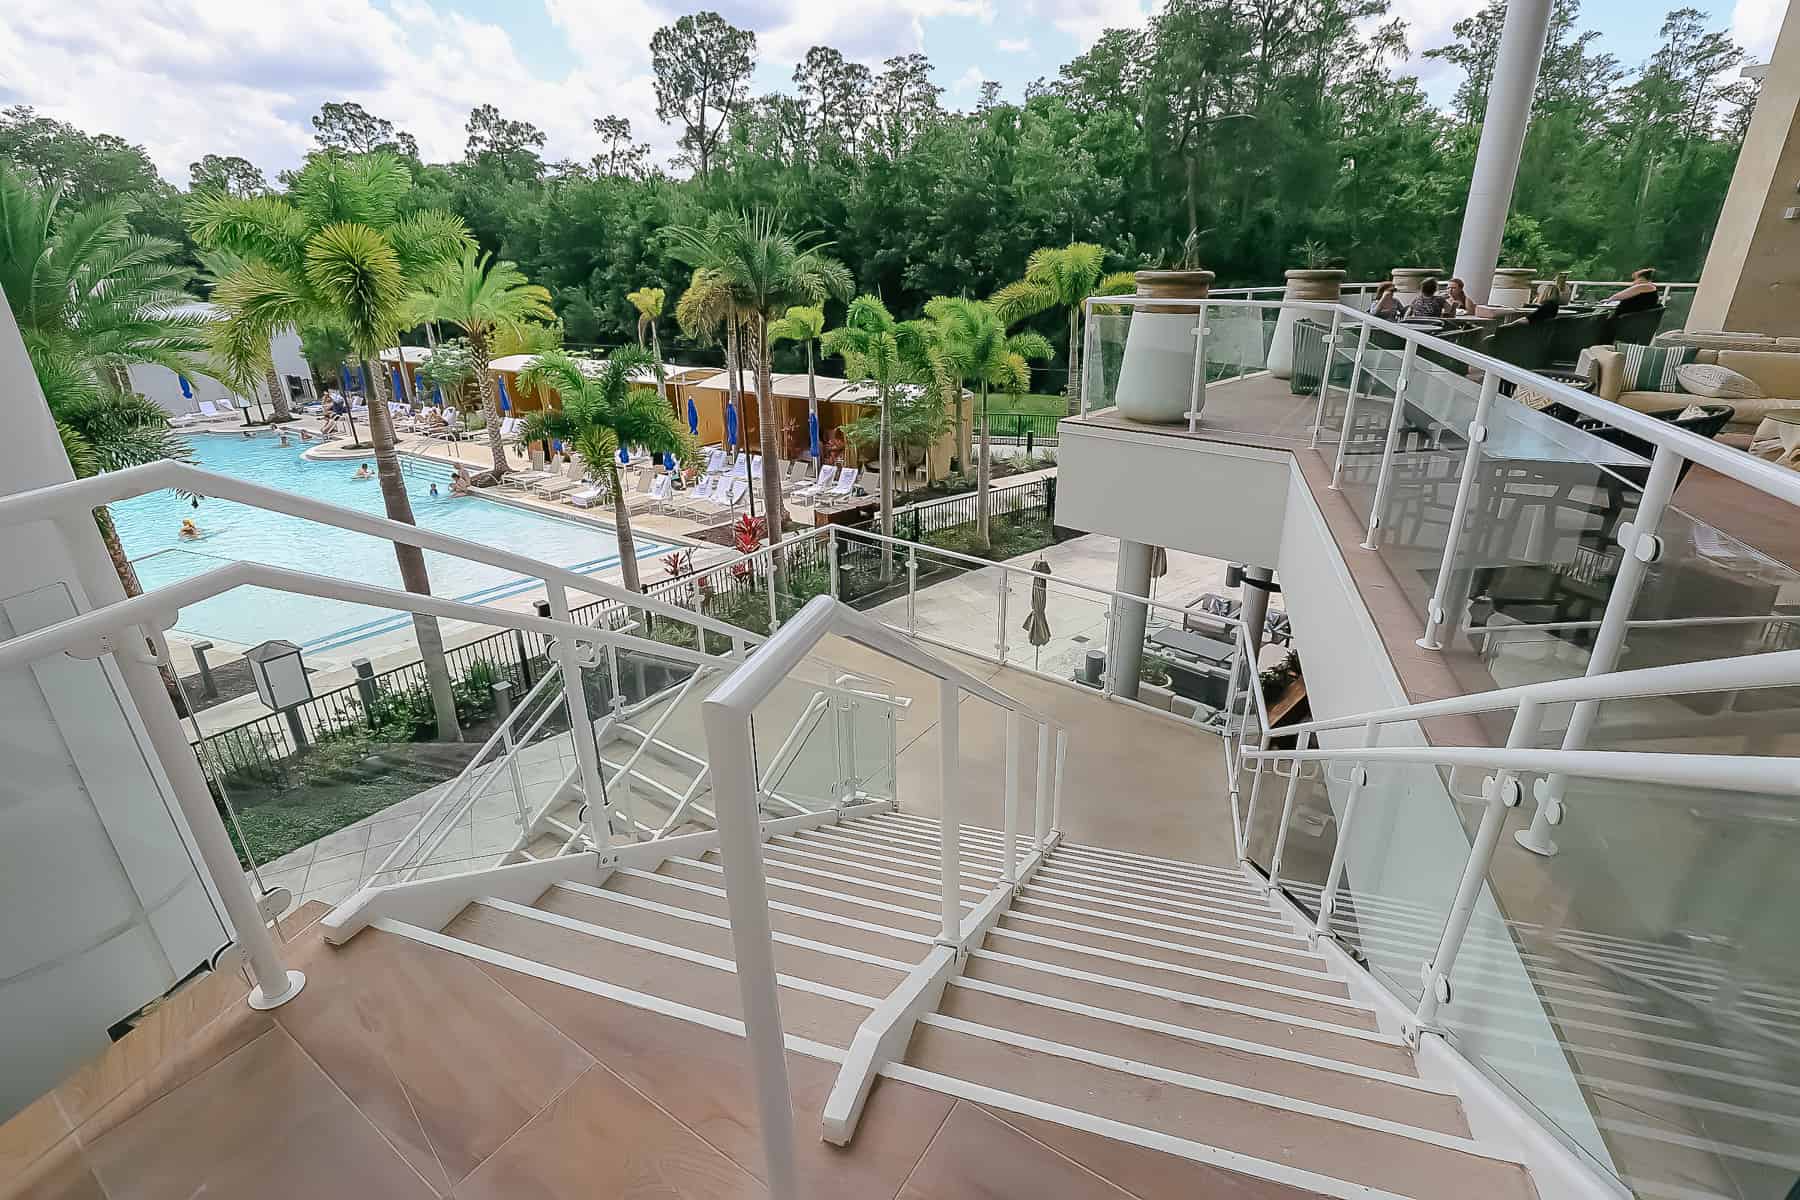 stairs to the pool area 